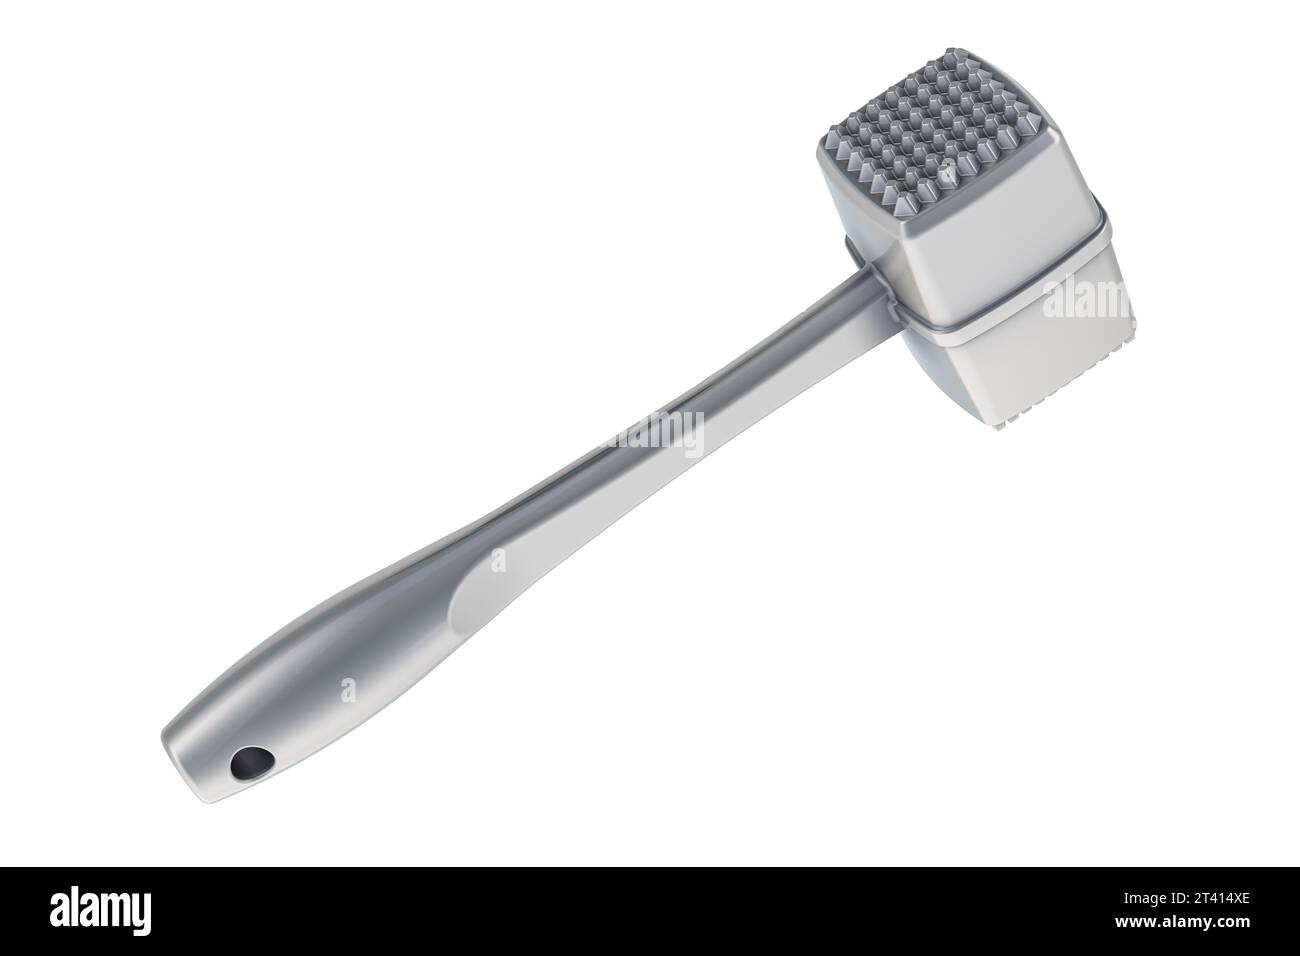 https://c8.alamy.com/comp/2T414XE/meat-tenderizer-hammer-mallet-tool-pounder-for-tenderizing-steak-beef-and-poultry-3d-rendering-isolated-on-white-background-2T414XE.jpg